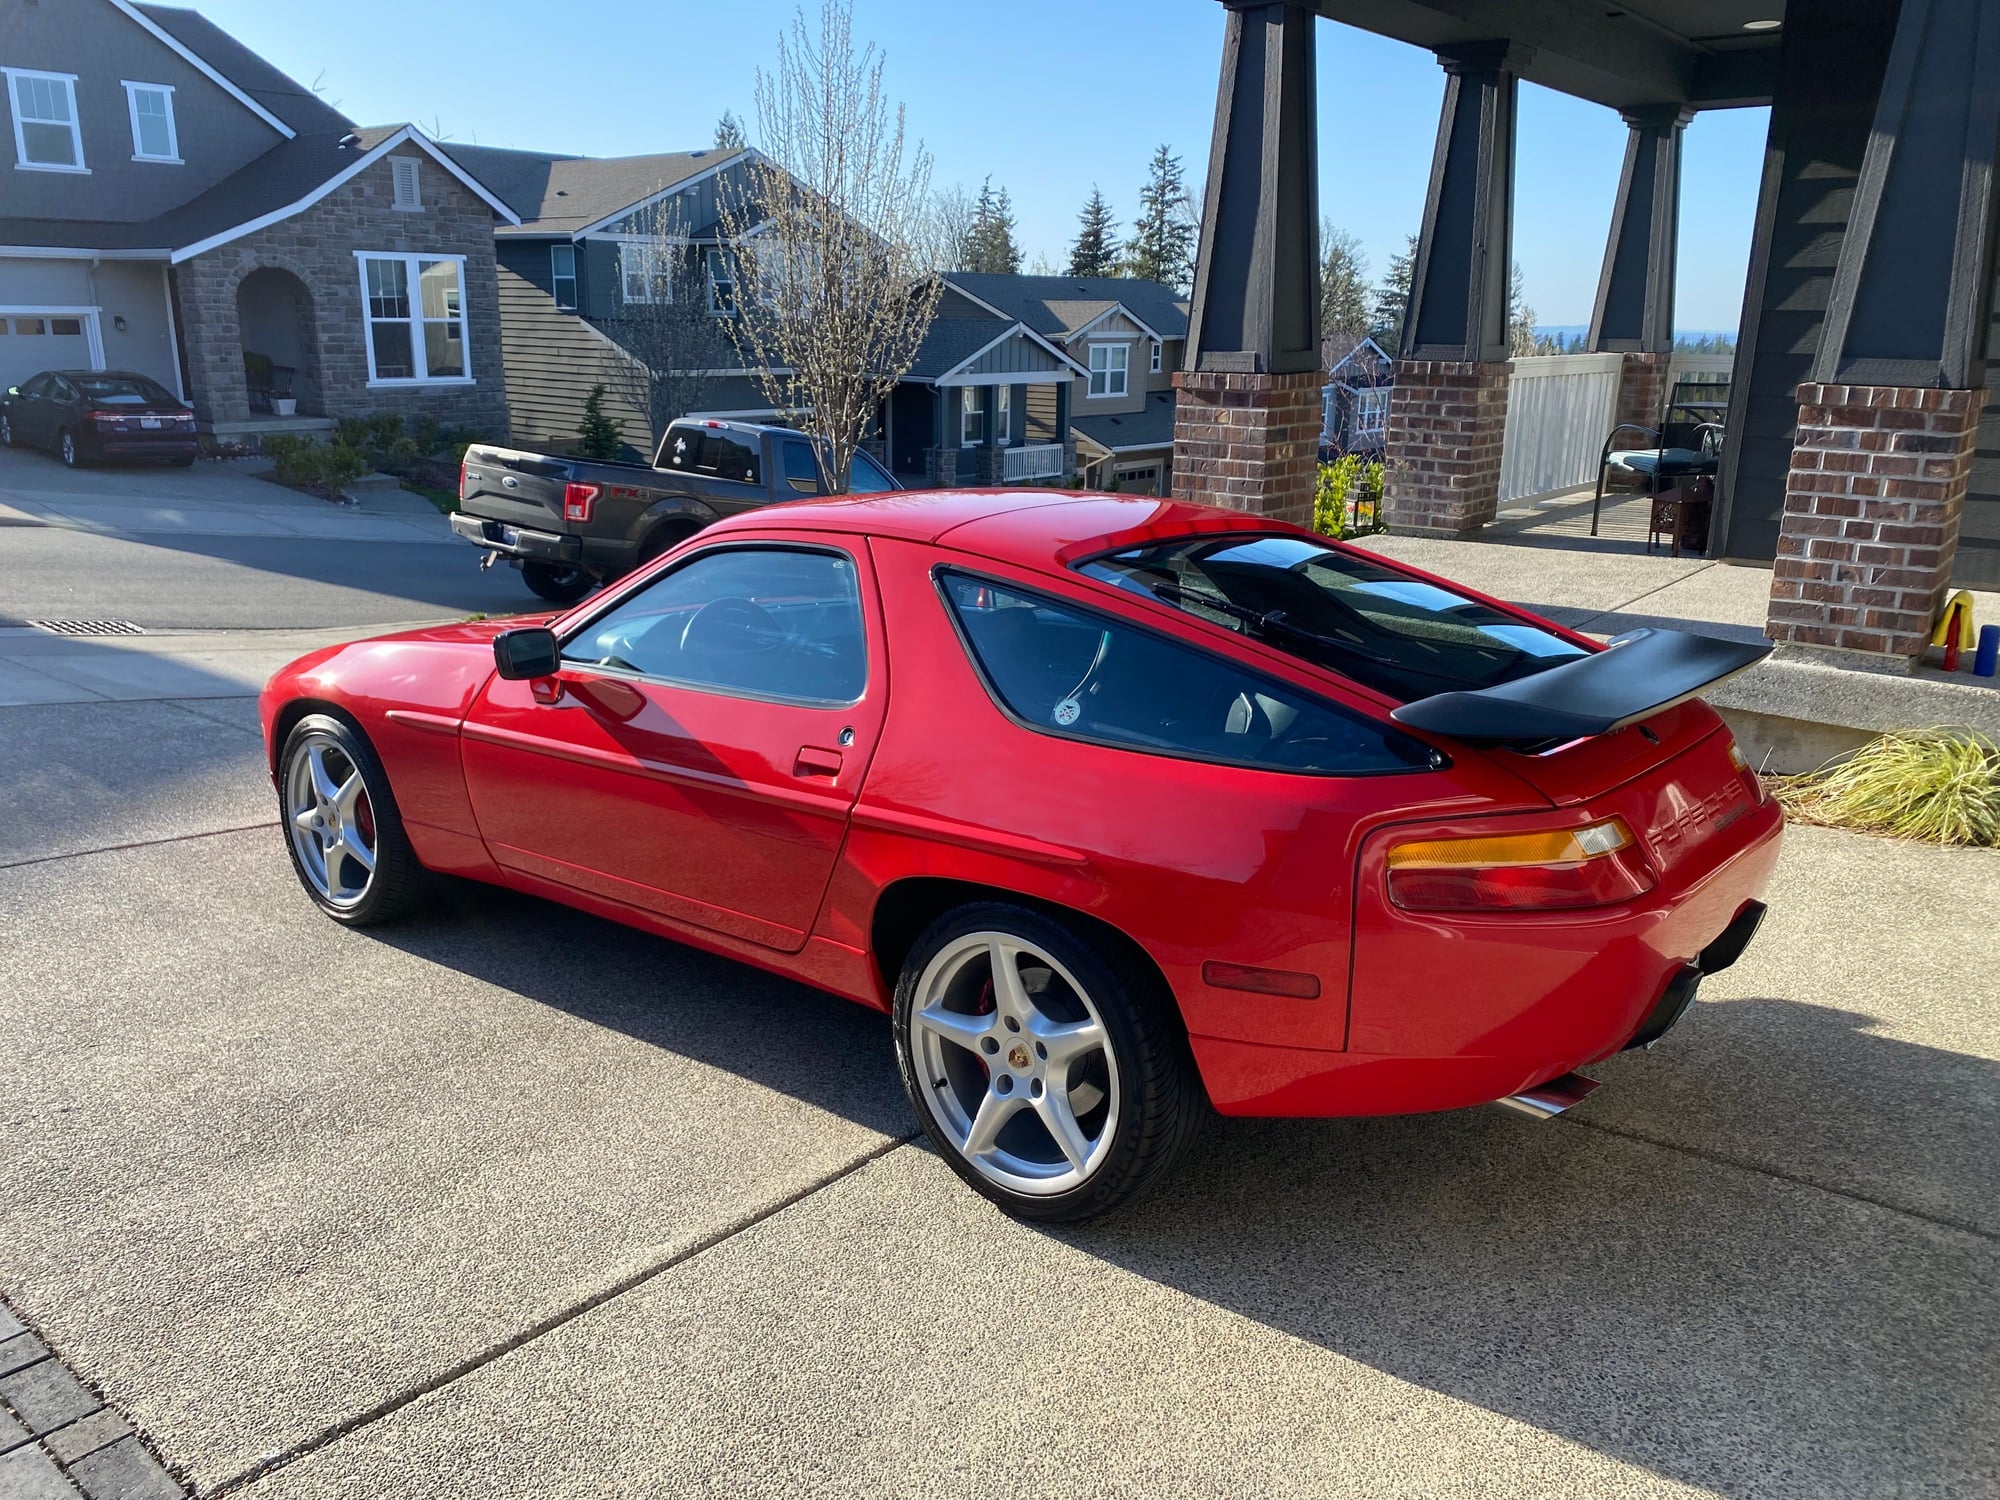 1988 Porsche 928 - 1988 Porsche 928 S4 5 Speed - Used - VIN WPOJBO928JS860978 - 8 cyl - 2WD - Manual - Coupe - Red - Snoqualmie, WA 98065, United States